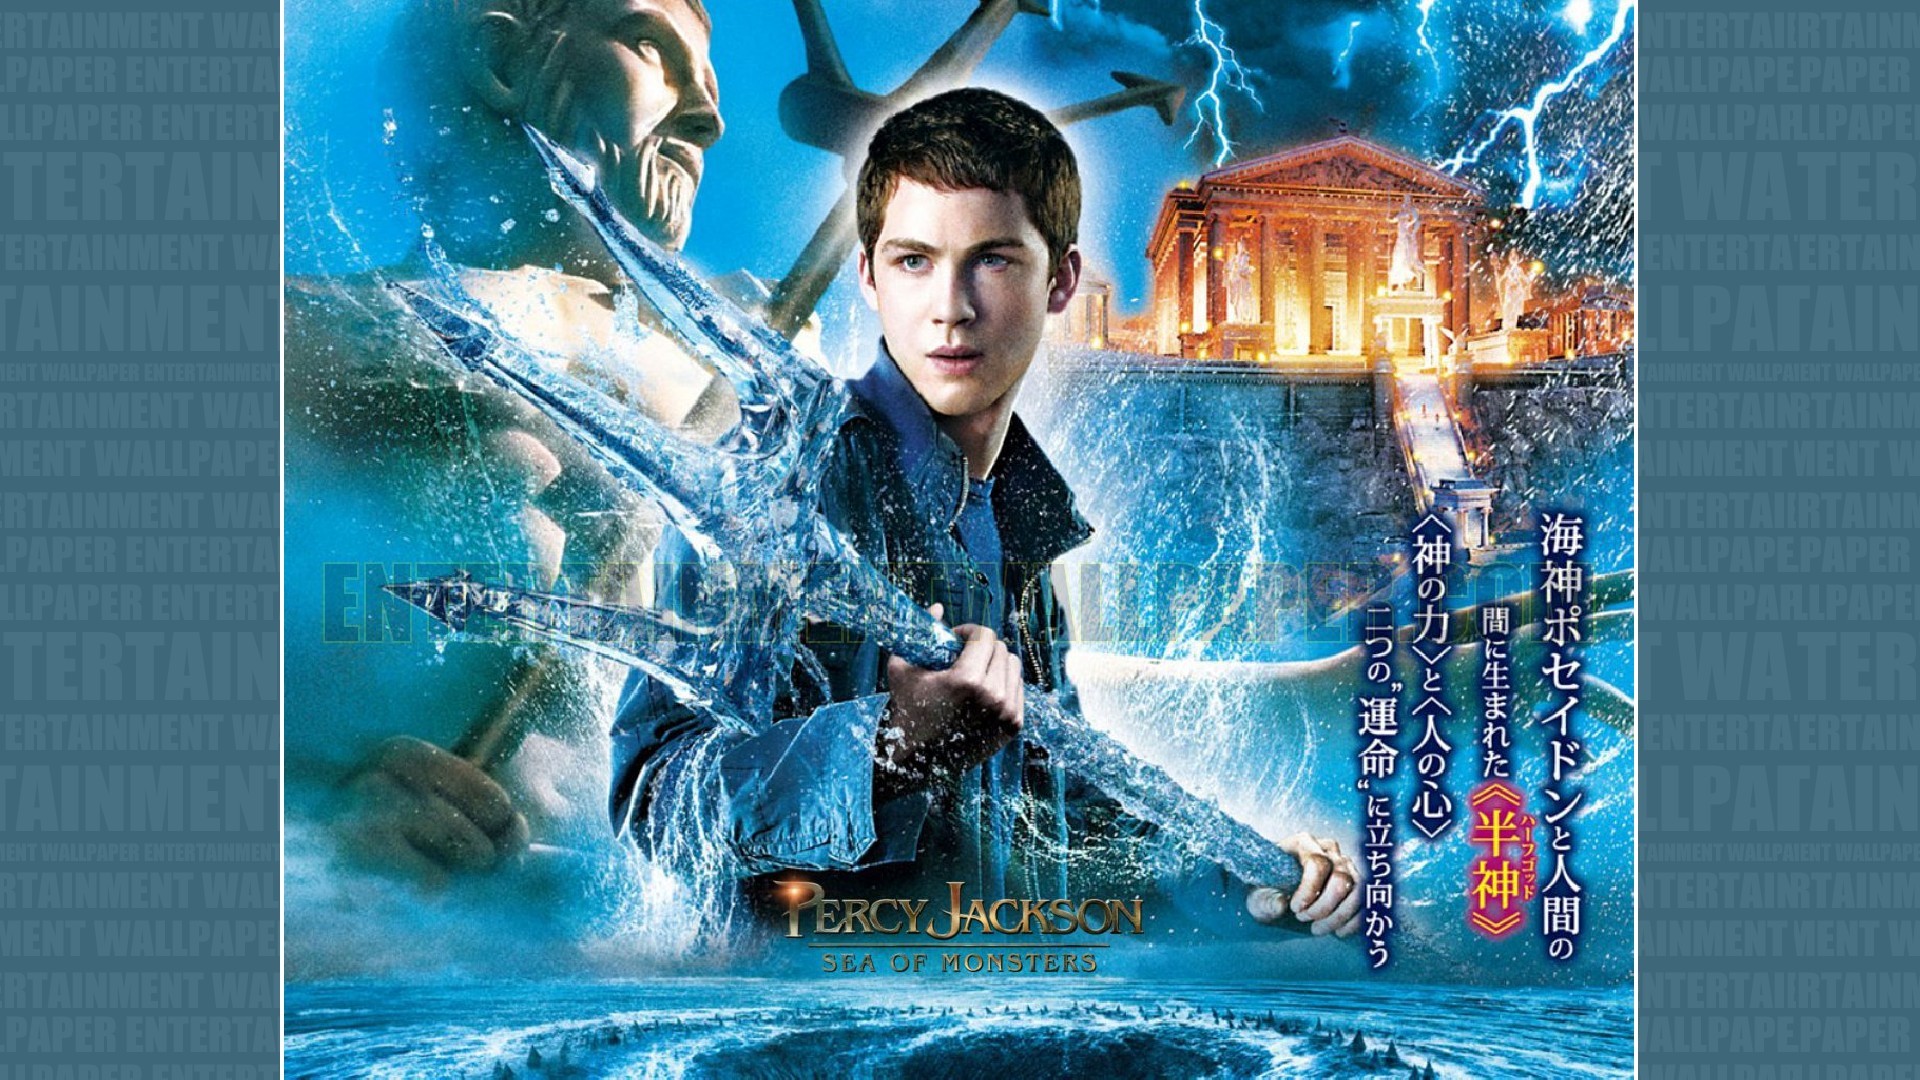 1920x1080 Percy Jackson: Sea of Monsters Wallpaper - Original size, download now.